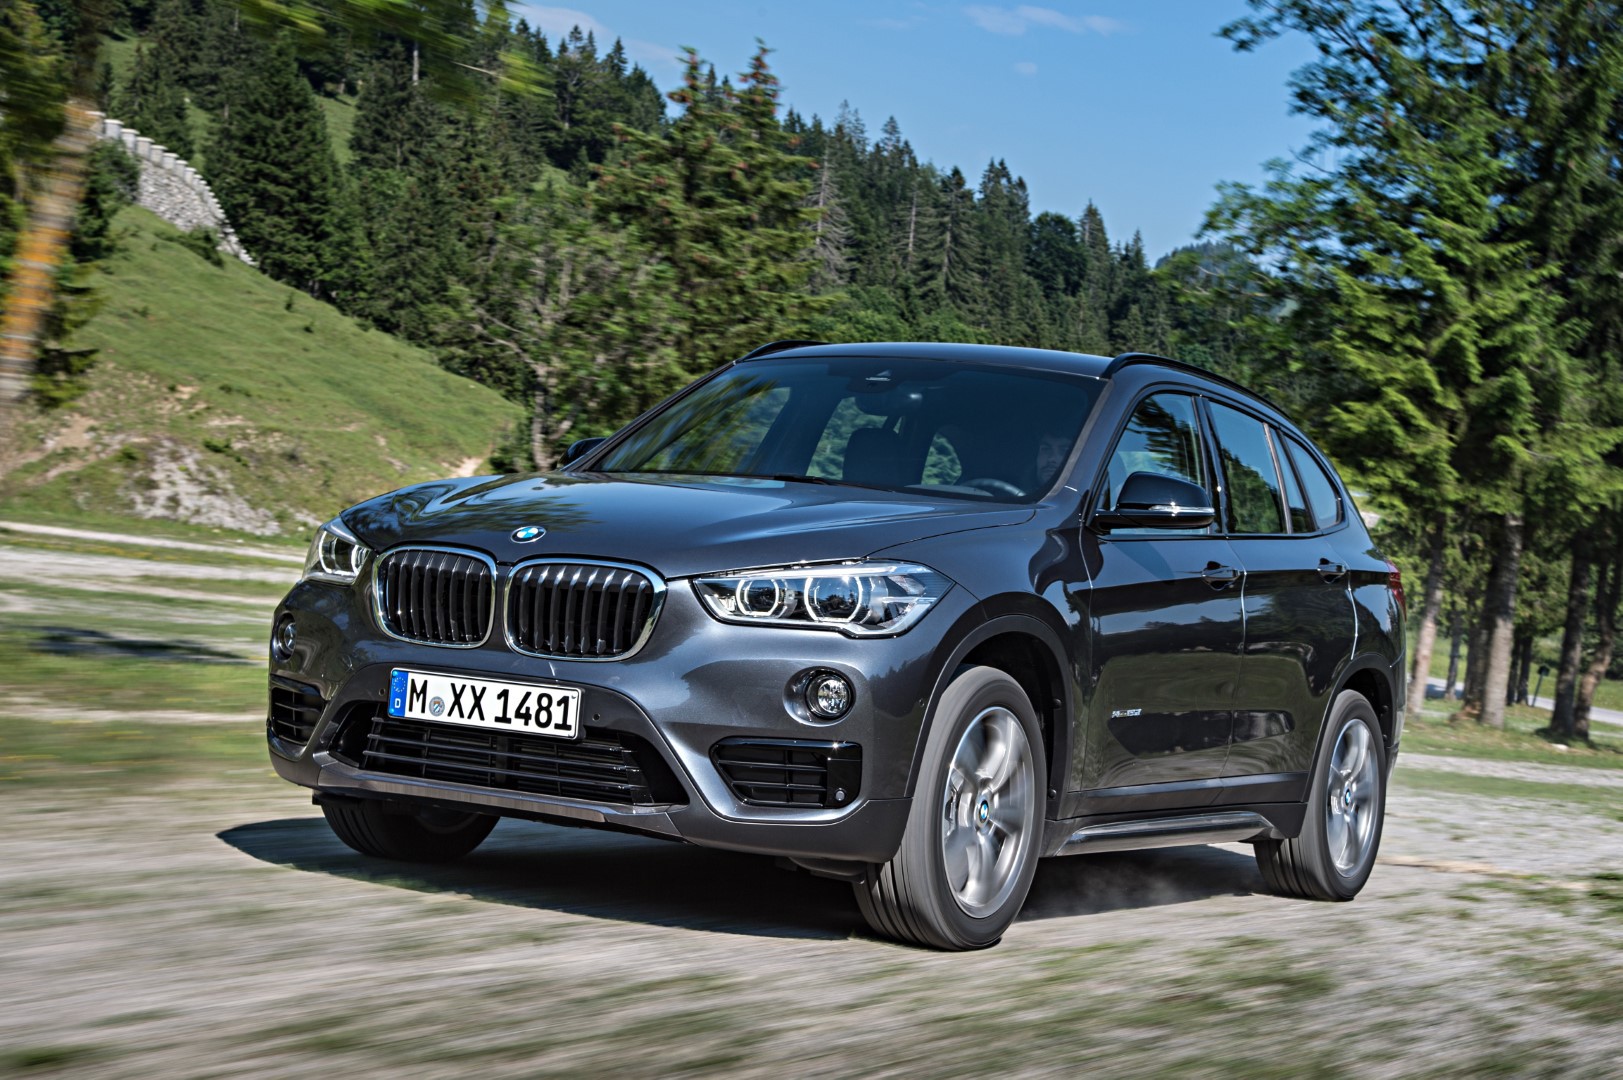 1554707770P90190734-highRes-the-new-bmw-x1-on-lo.jpg